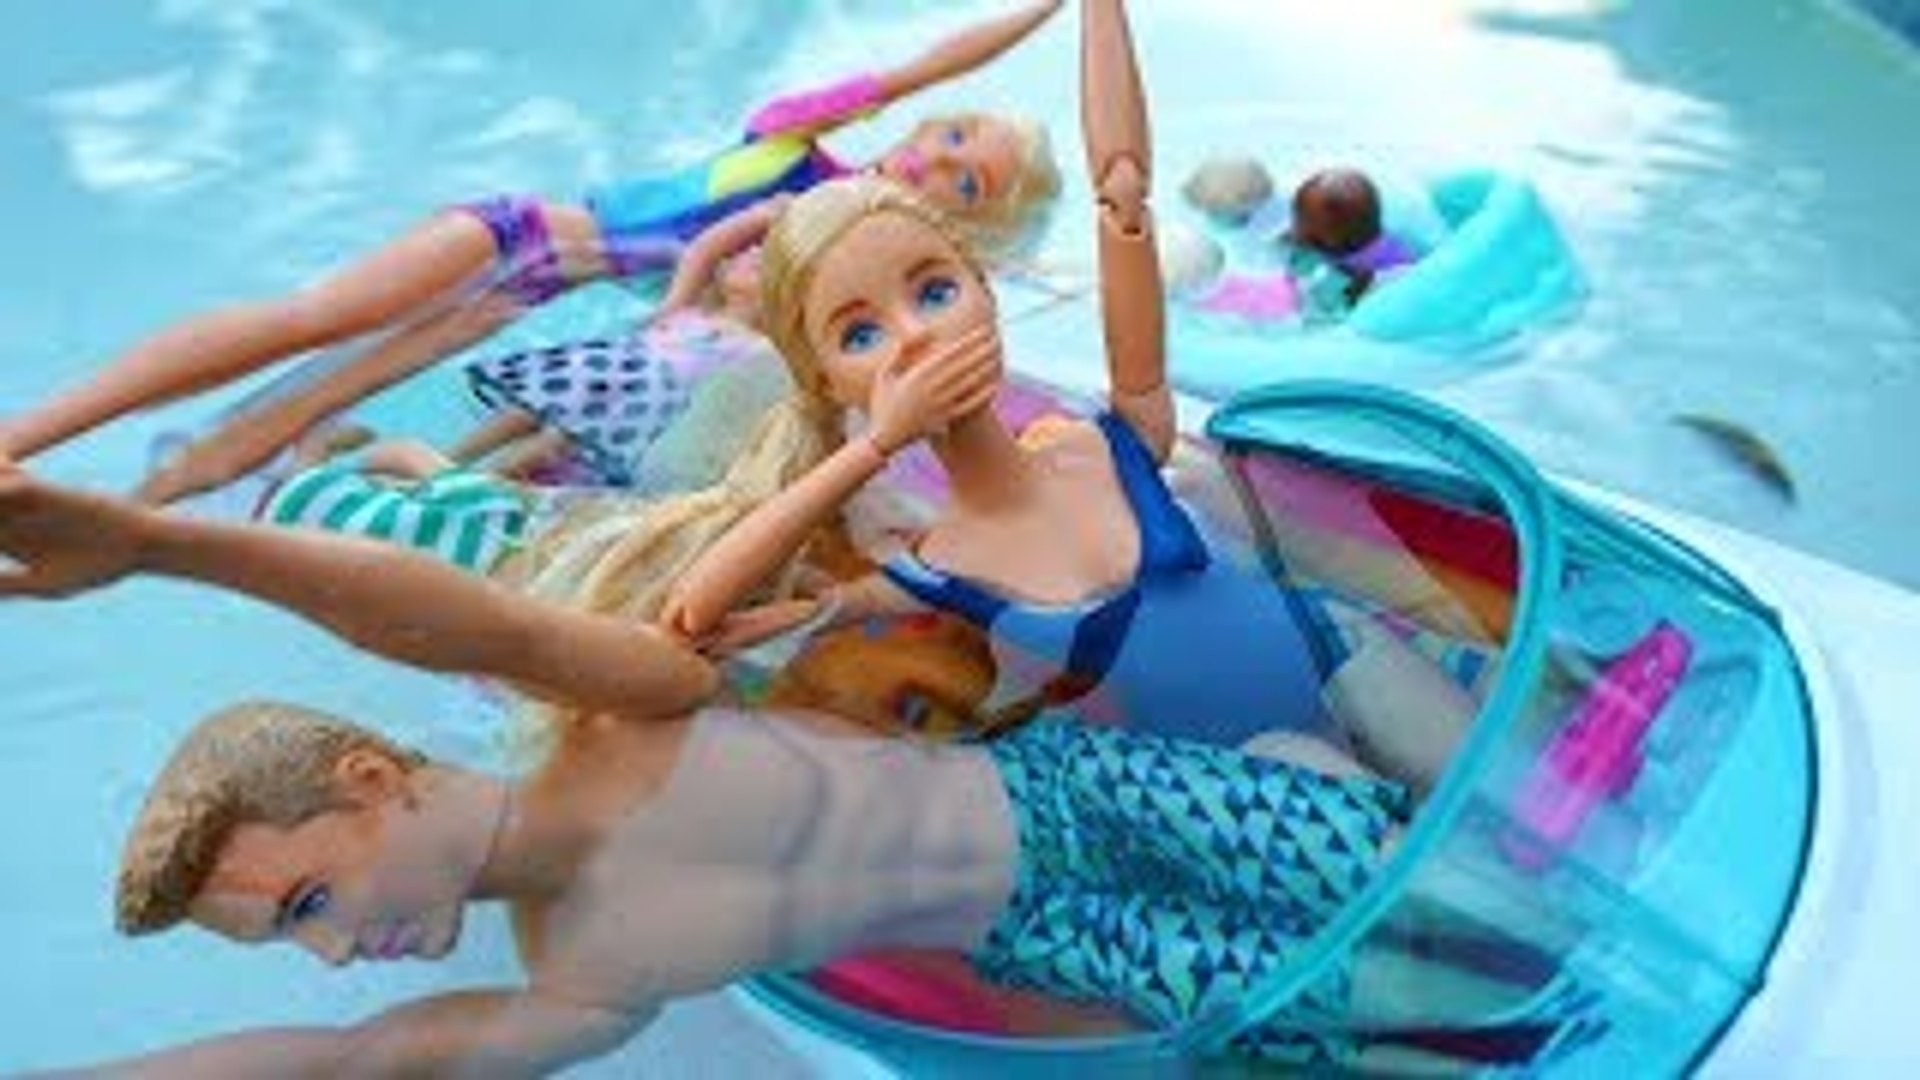 BARBIE SINKS BOAT! Boating And Swimming With Barbie And Friends! Barbie  Videos - Dailymotion Video